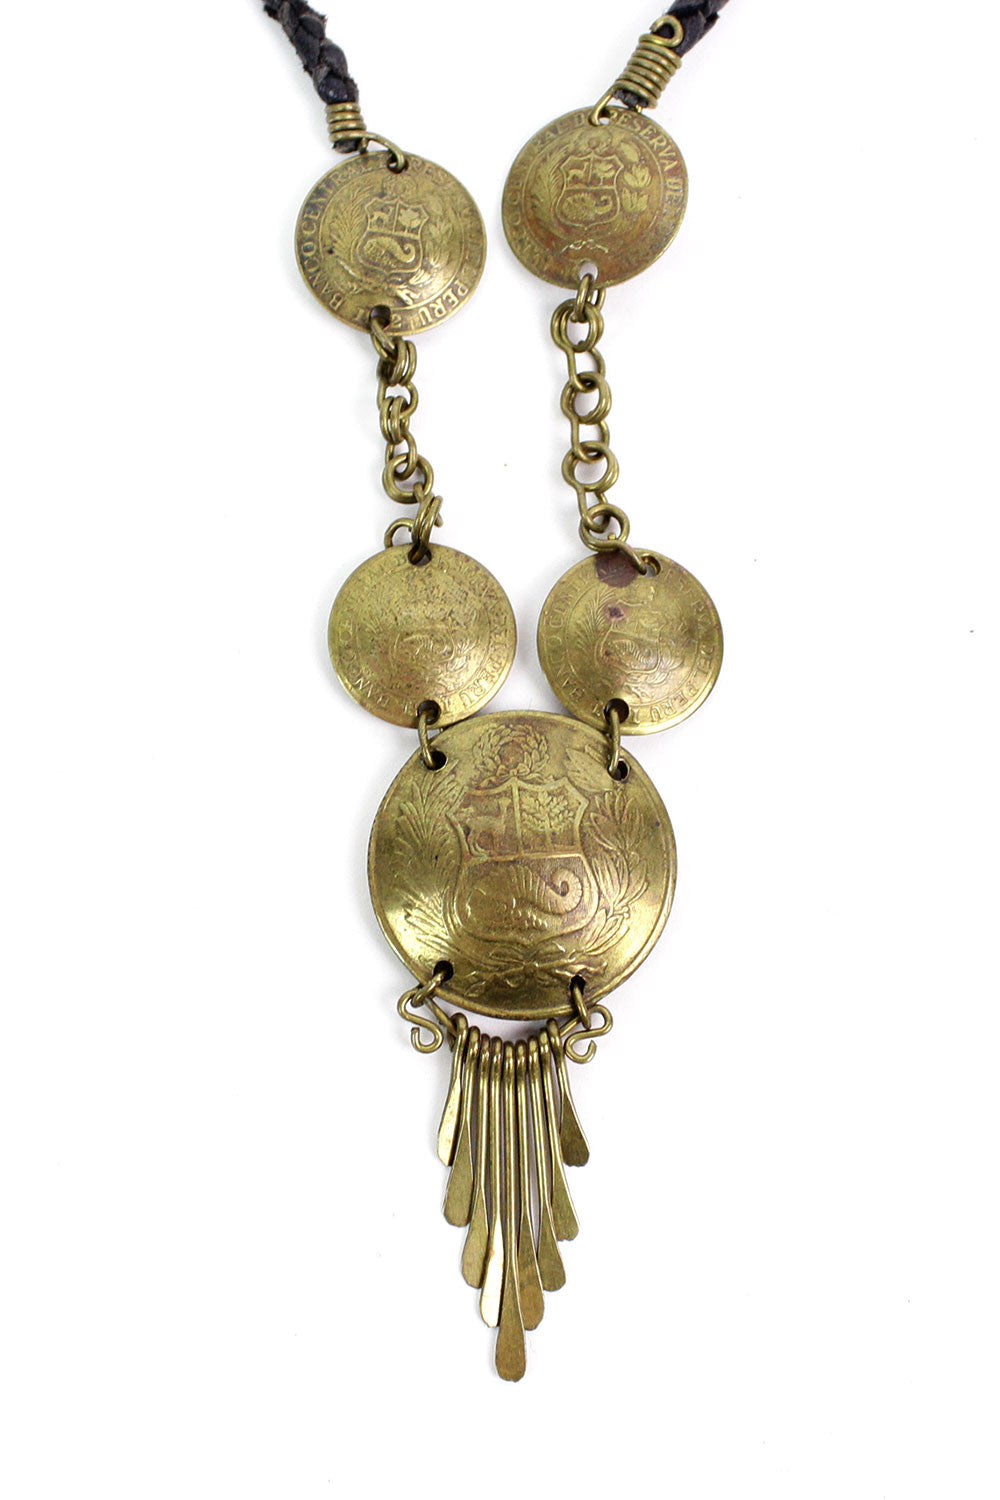 Peruvian Coin Necklace